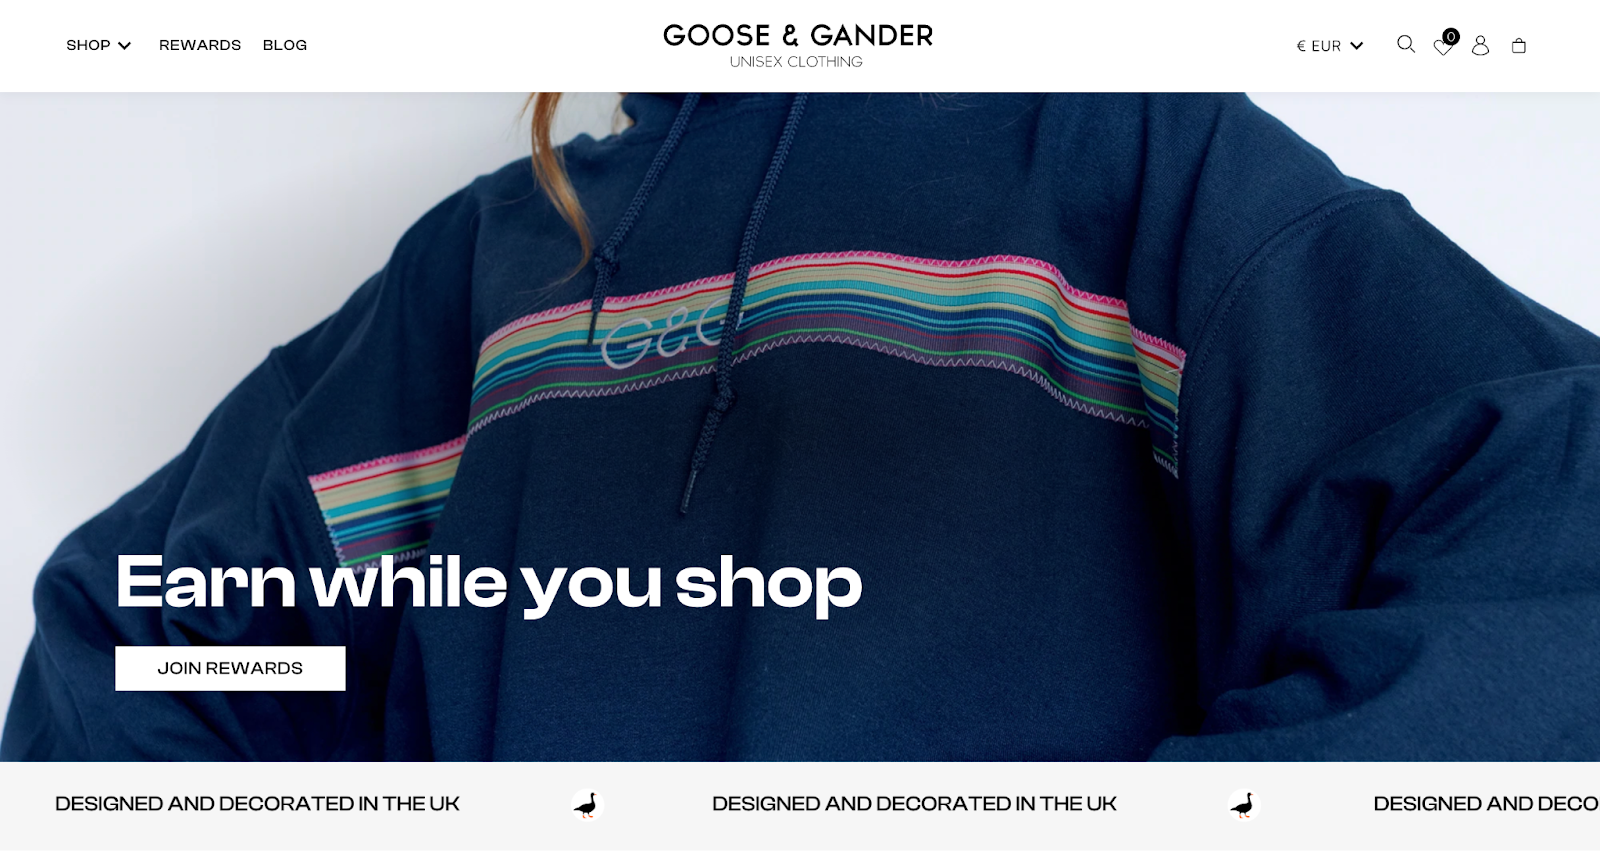 Ecommerce loyalty explainer page–A screenshot from Goose & Gander’s rewards explainer page with an image of a blue hoodie that has a rainbow stripe and text reading “Earn while you shop”. 